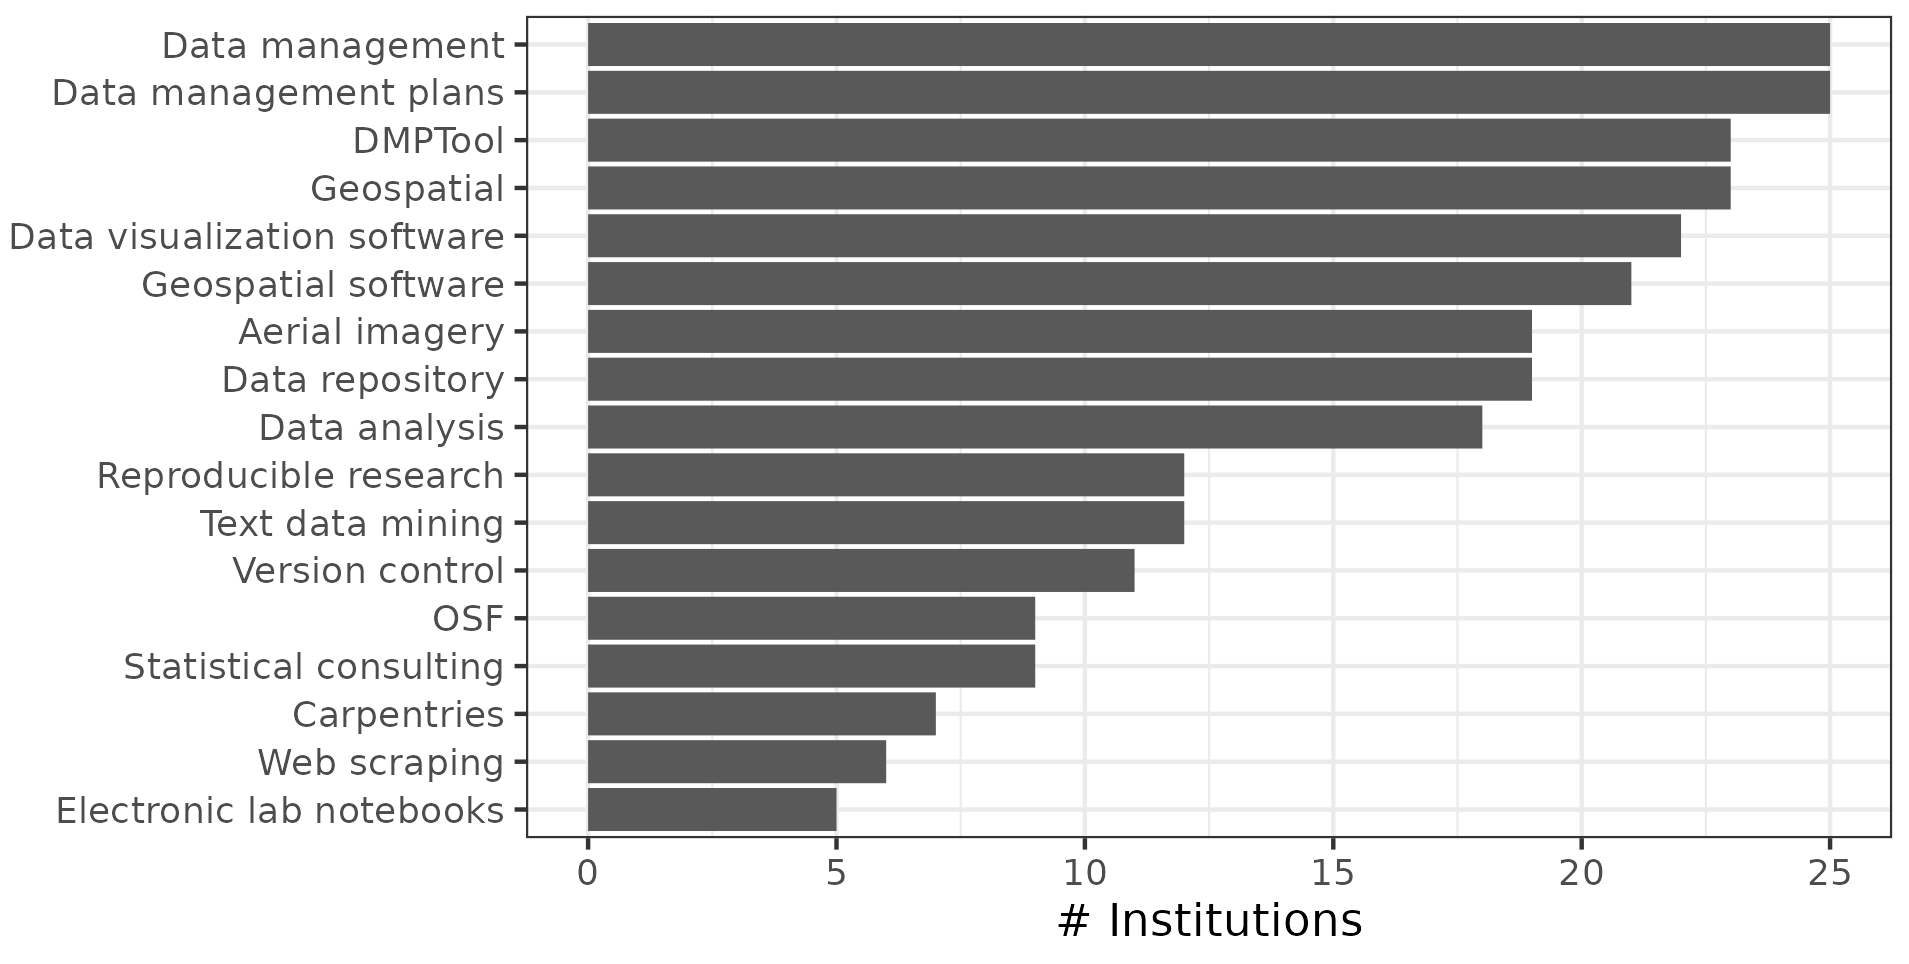 Bar chart showing frequency of different research data services at 25 academic libraries.